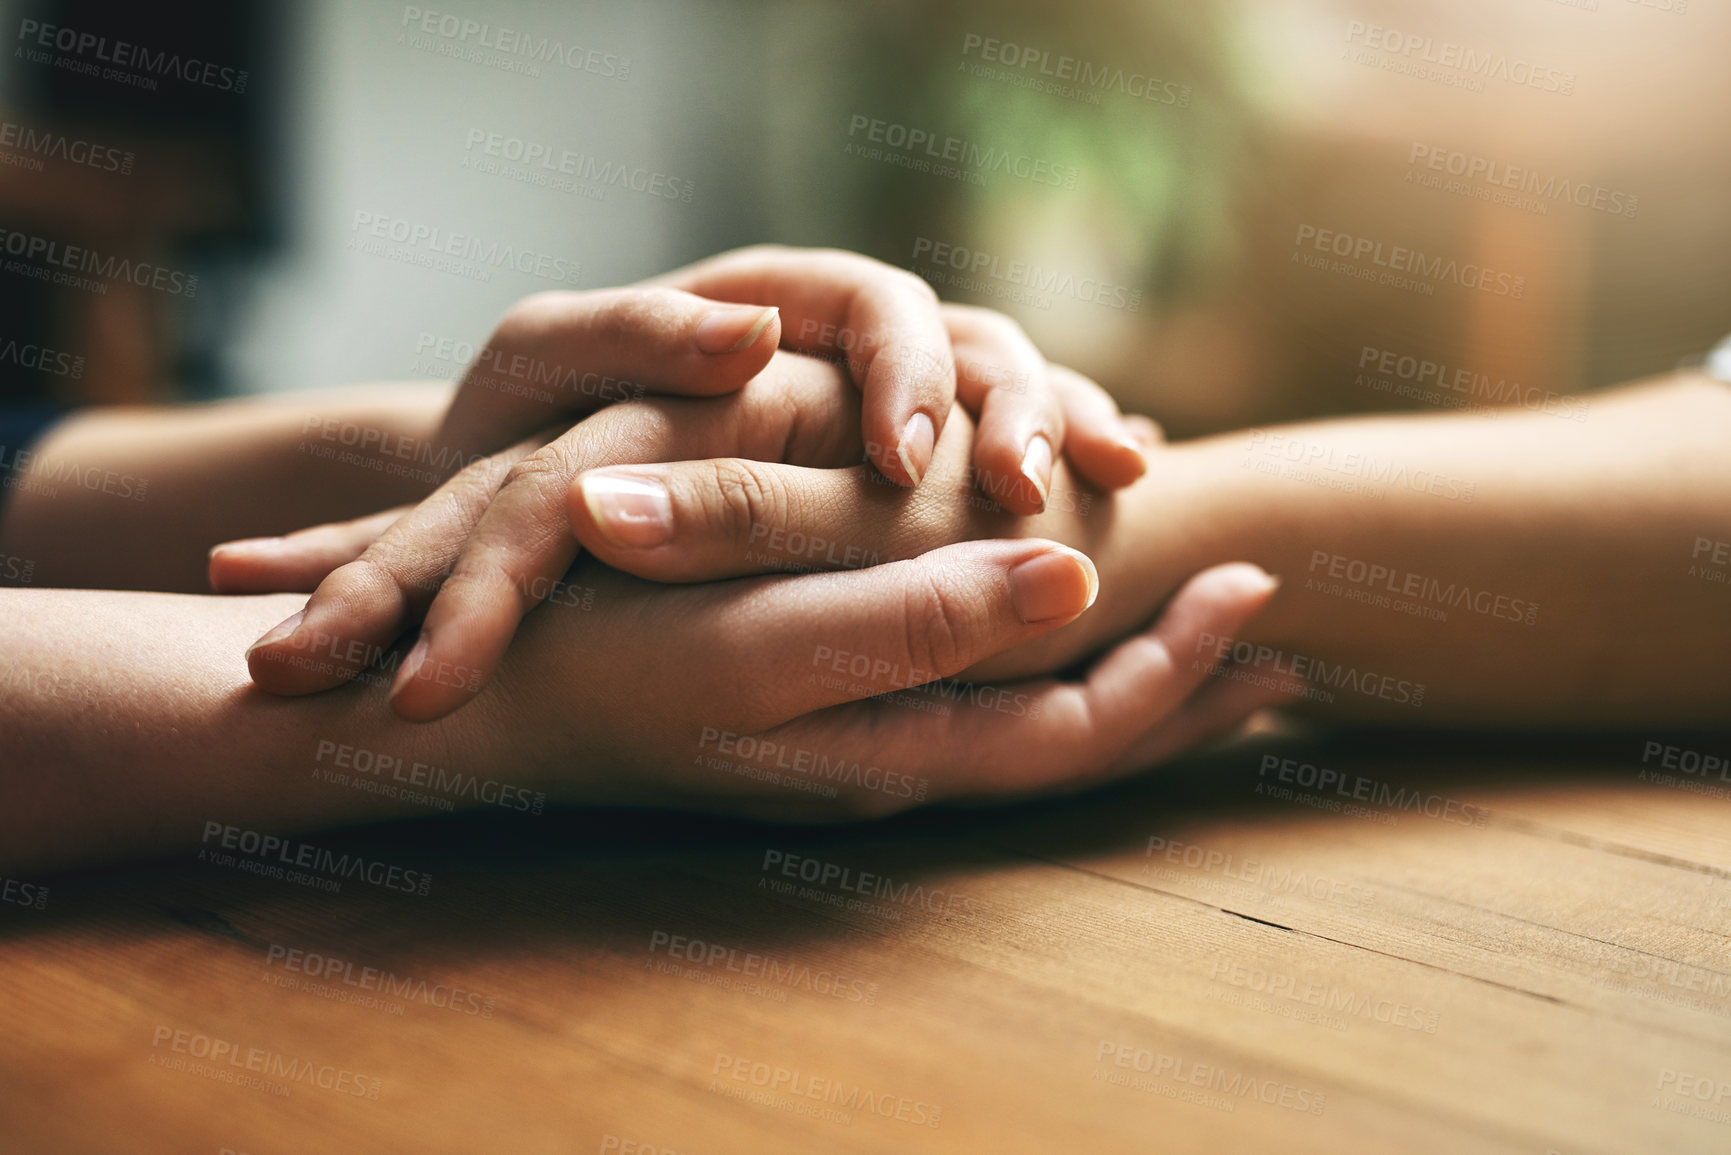 Buy stock photo Holding hands, counseling and support of friends, care and empathy together on table after cancer. Kindness, love and women hold hand for hope, trust or prayer, comfort or compassion, help or unity.